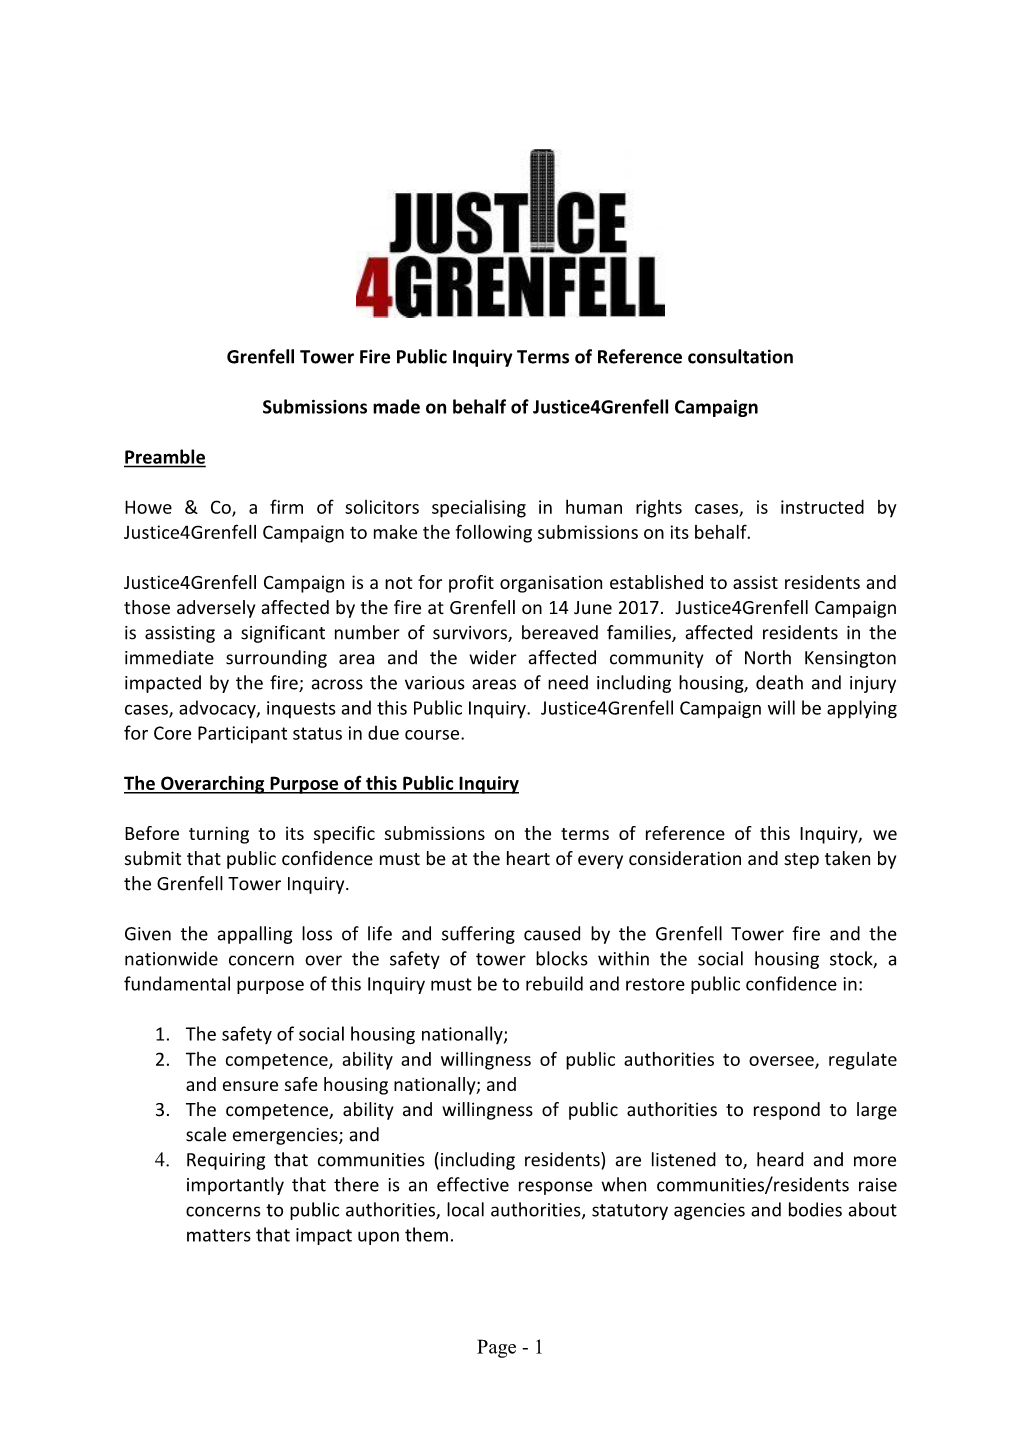 1 Grenfell Tower Fire Public Inquiry Terms of Reference Consultation